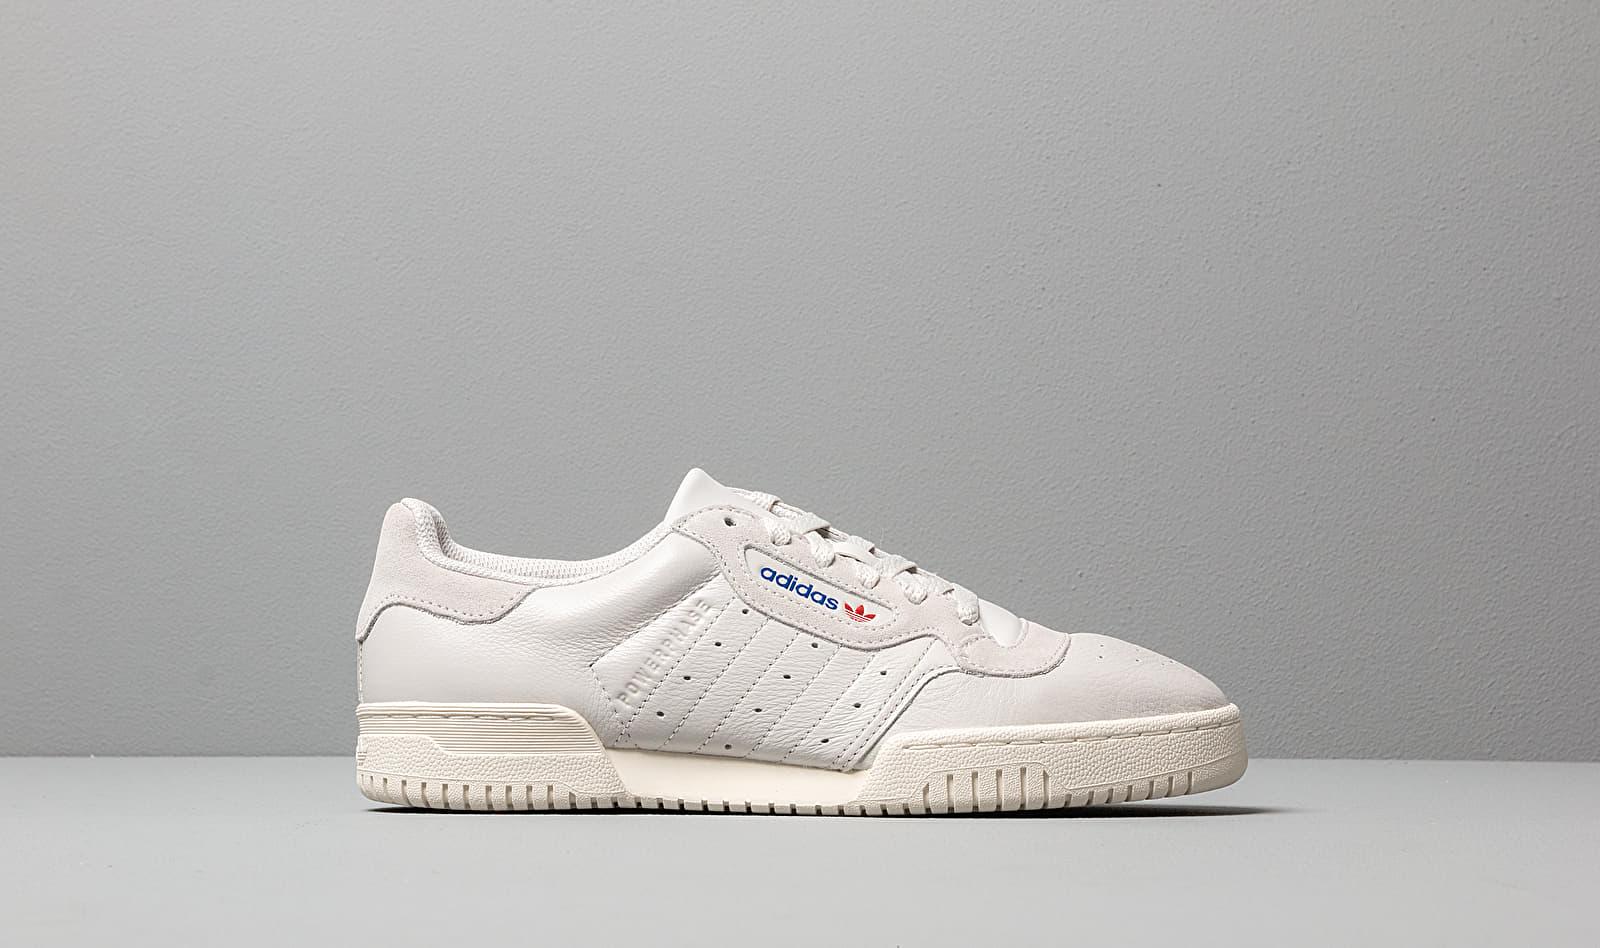 Adidas Powerphase Grey One Ireland, SAVE 40% - aveclumiere.com